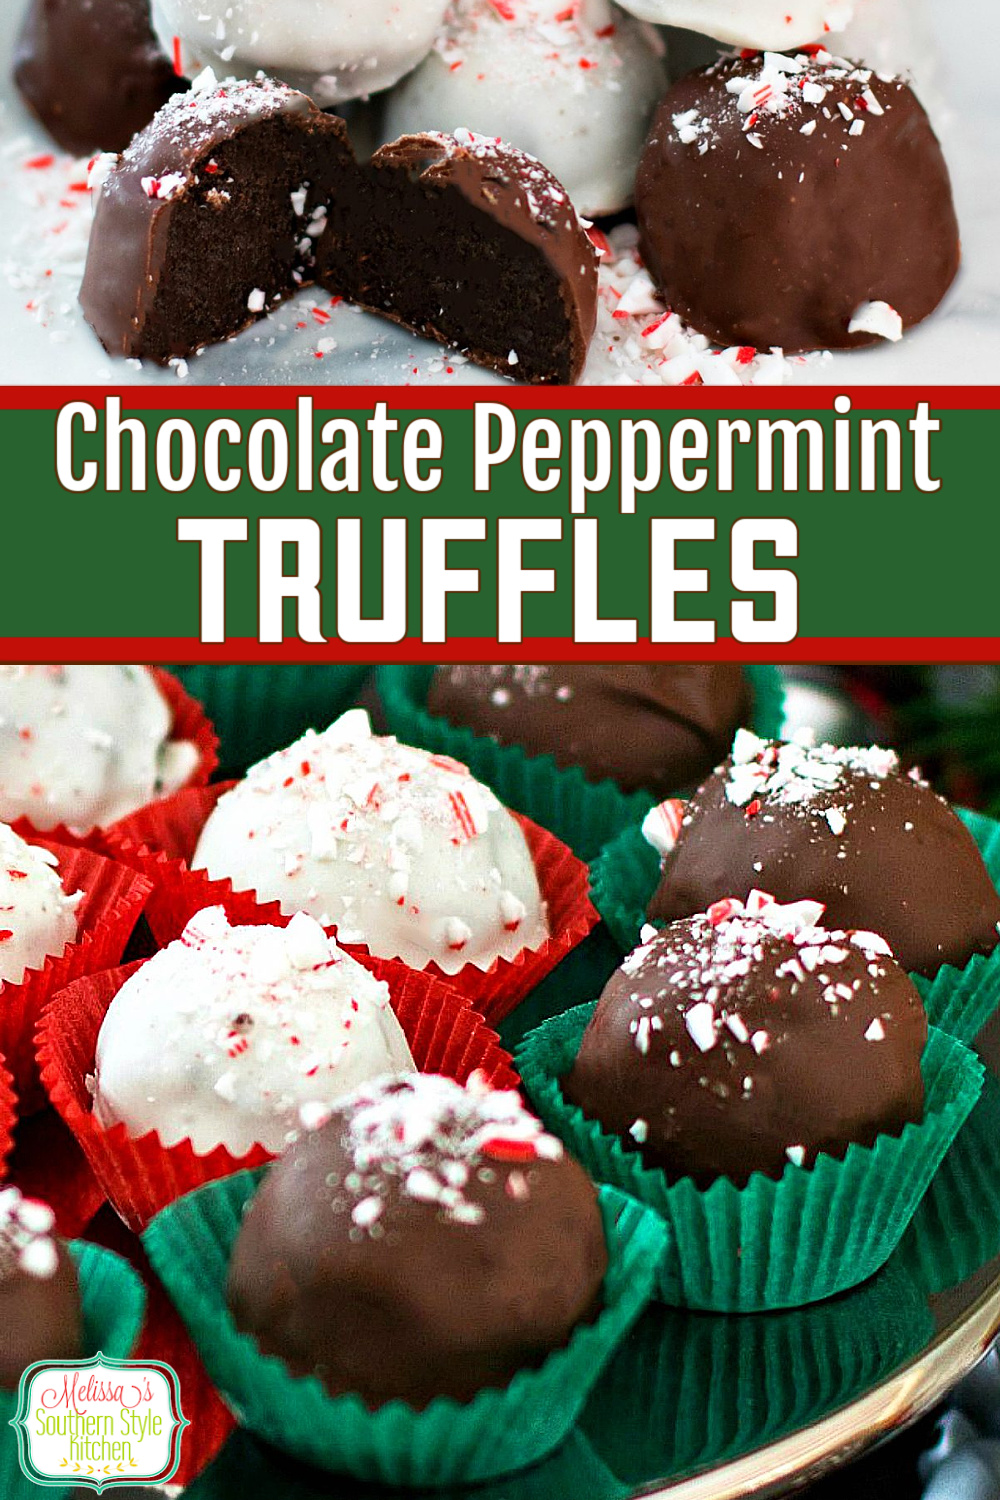 These easy two-bite Chocolate Peppermint Truffles require no cooking at all #oreotruffles #pepperminttruffles #chocolatepepperminttruffles #easydessertrecipes #holidayrecipes #desserts #holidaydesserts #christmascandy #dessertfoodreipes #easyrecipes #chocolate #southernrecipes #southernfood #melissassouthernstylekitchen #peppermintdesserts via @melissasssk